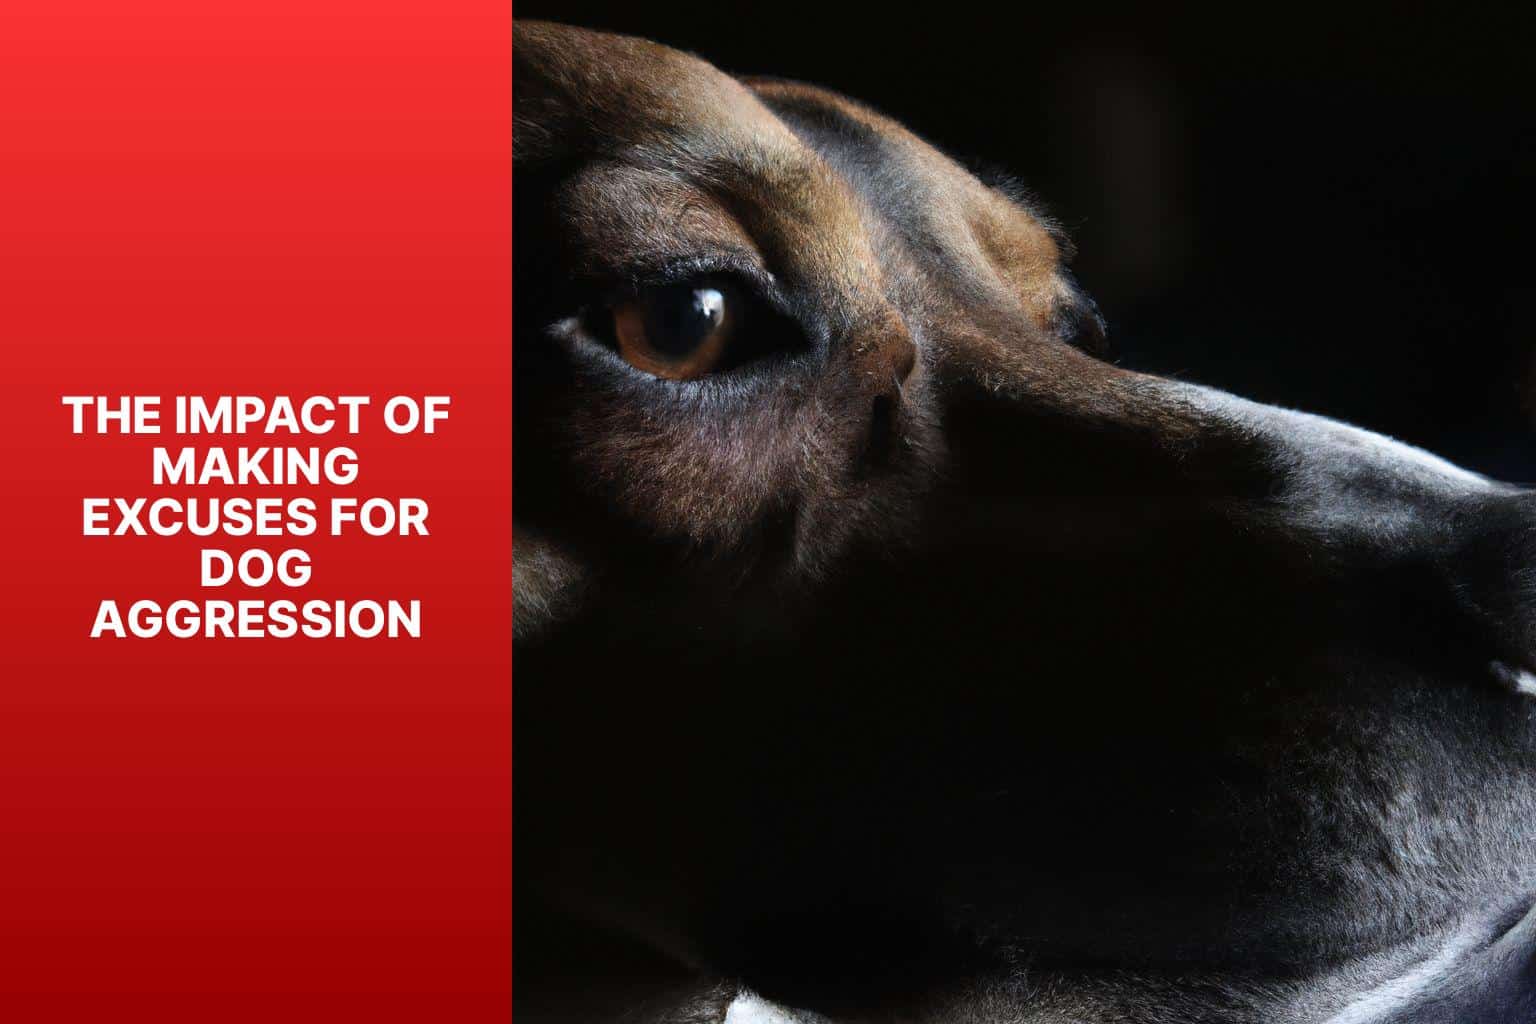 The Impact of Making Excuses for Dog Aggression - Why Do Dog Owners Make Excuses For Their Dogs Aggression 